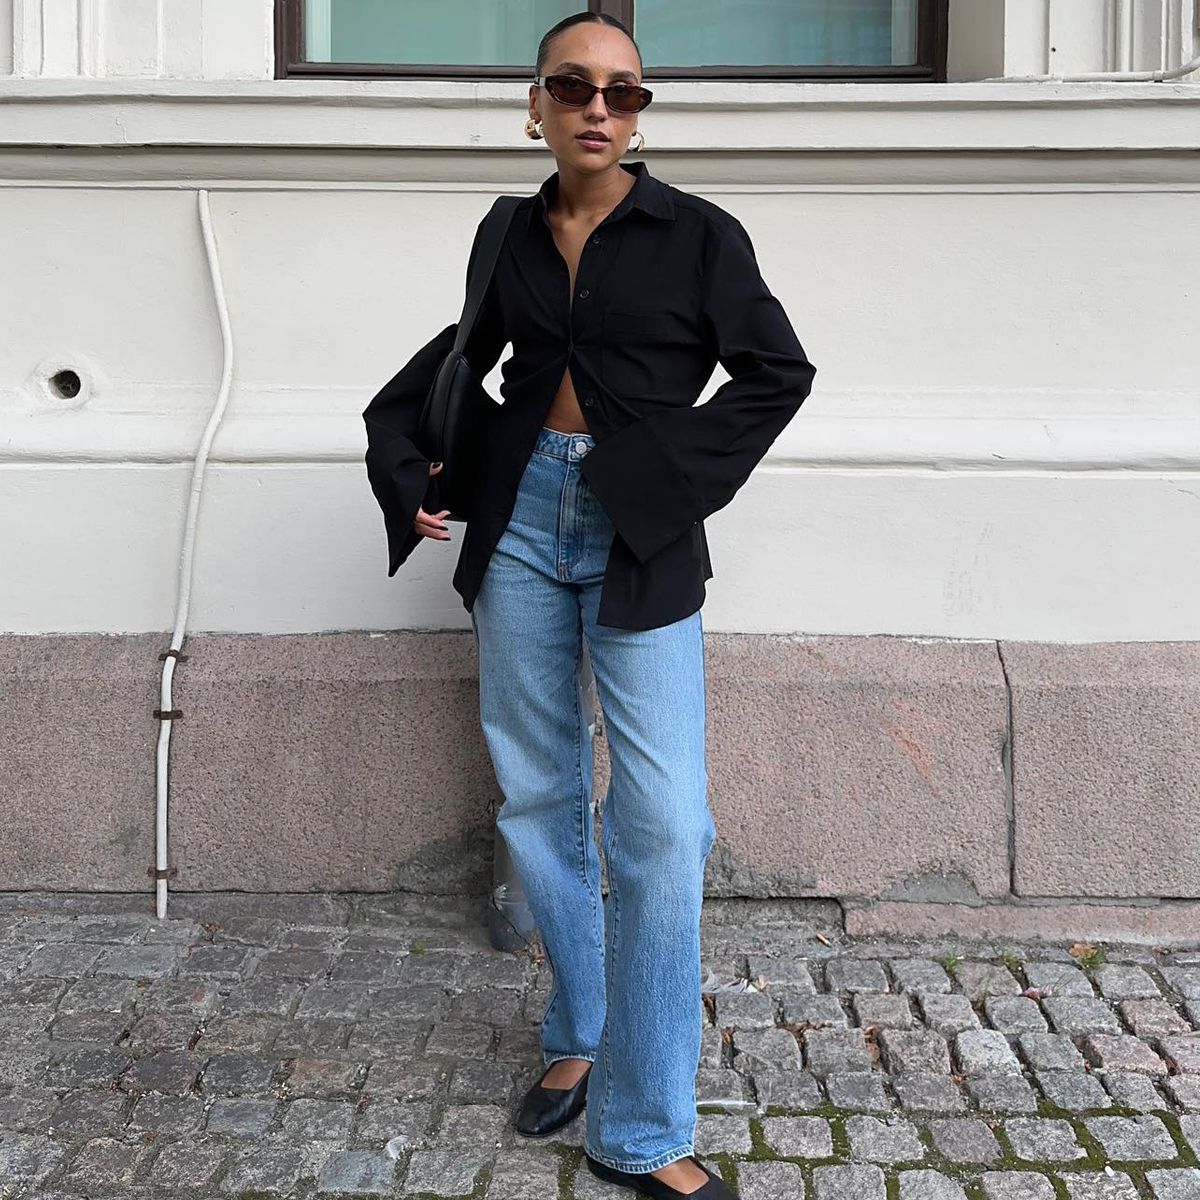 The Uncomplicated Top-and-Jeans Outfit You'll Find Chic Women Across Europe Wearing